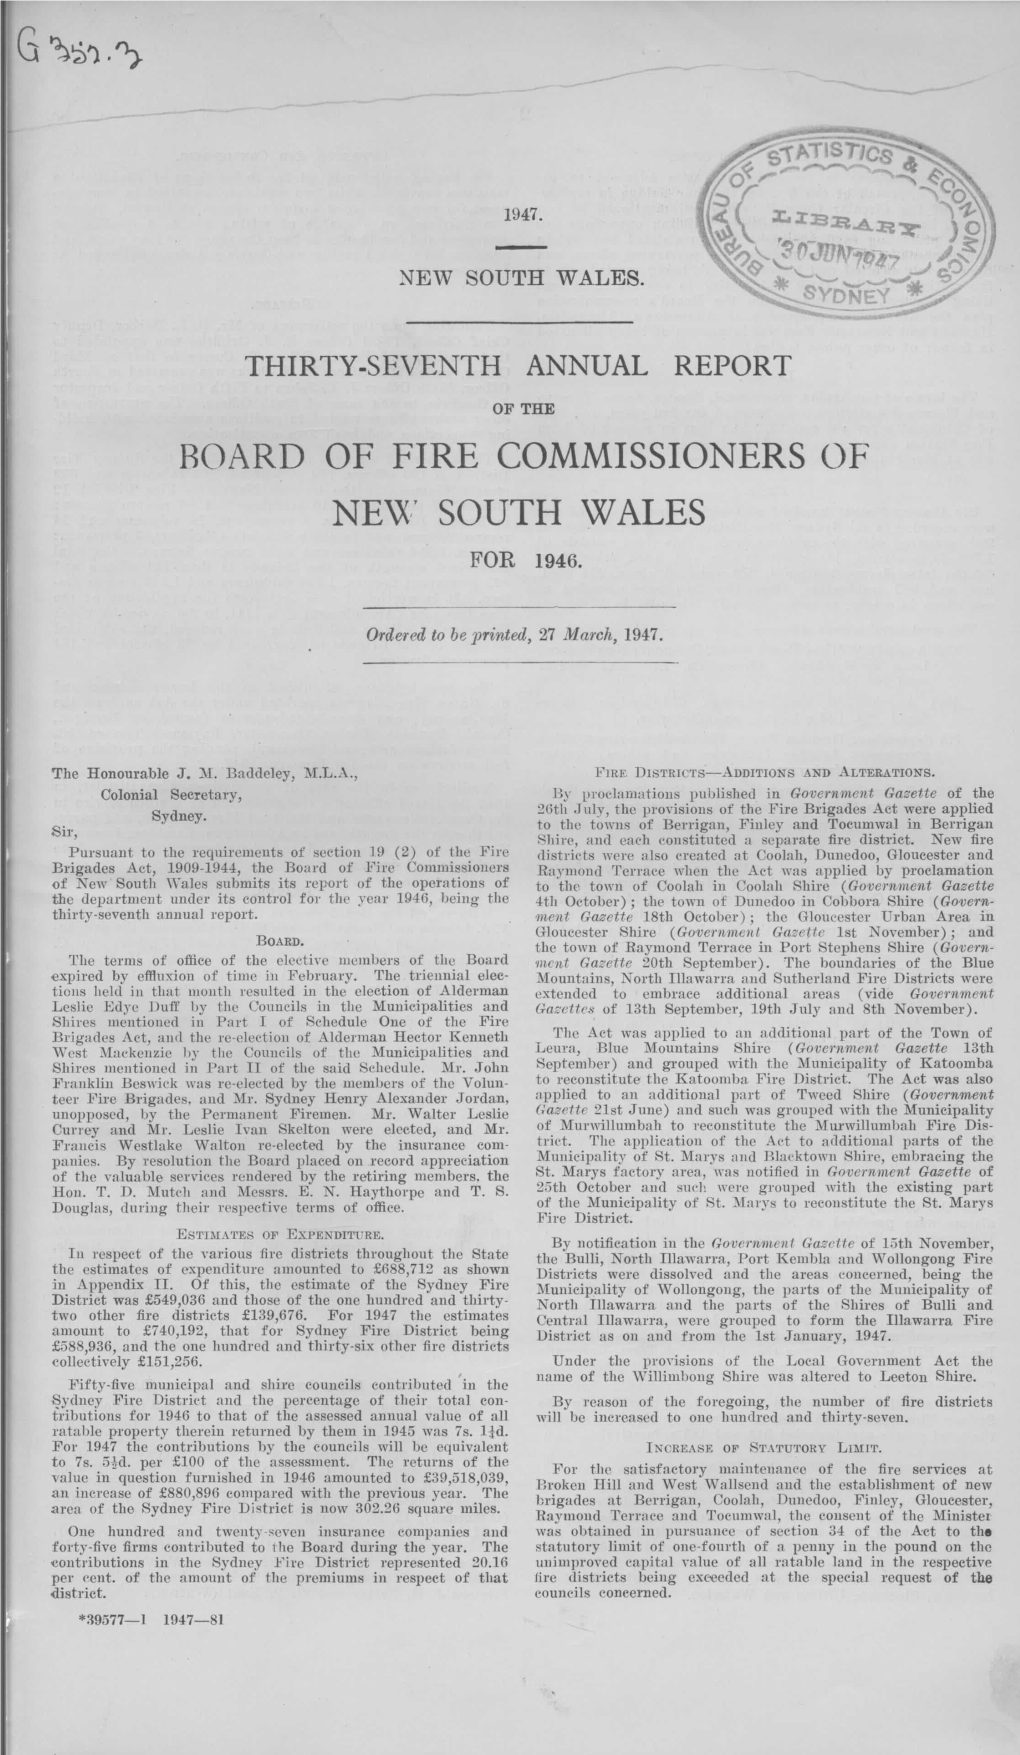 Of Fire Commissioners of Ne\X' South Wales for 1946